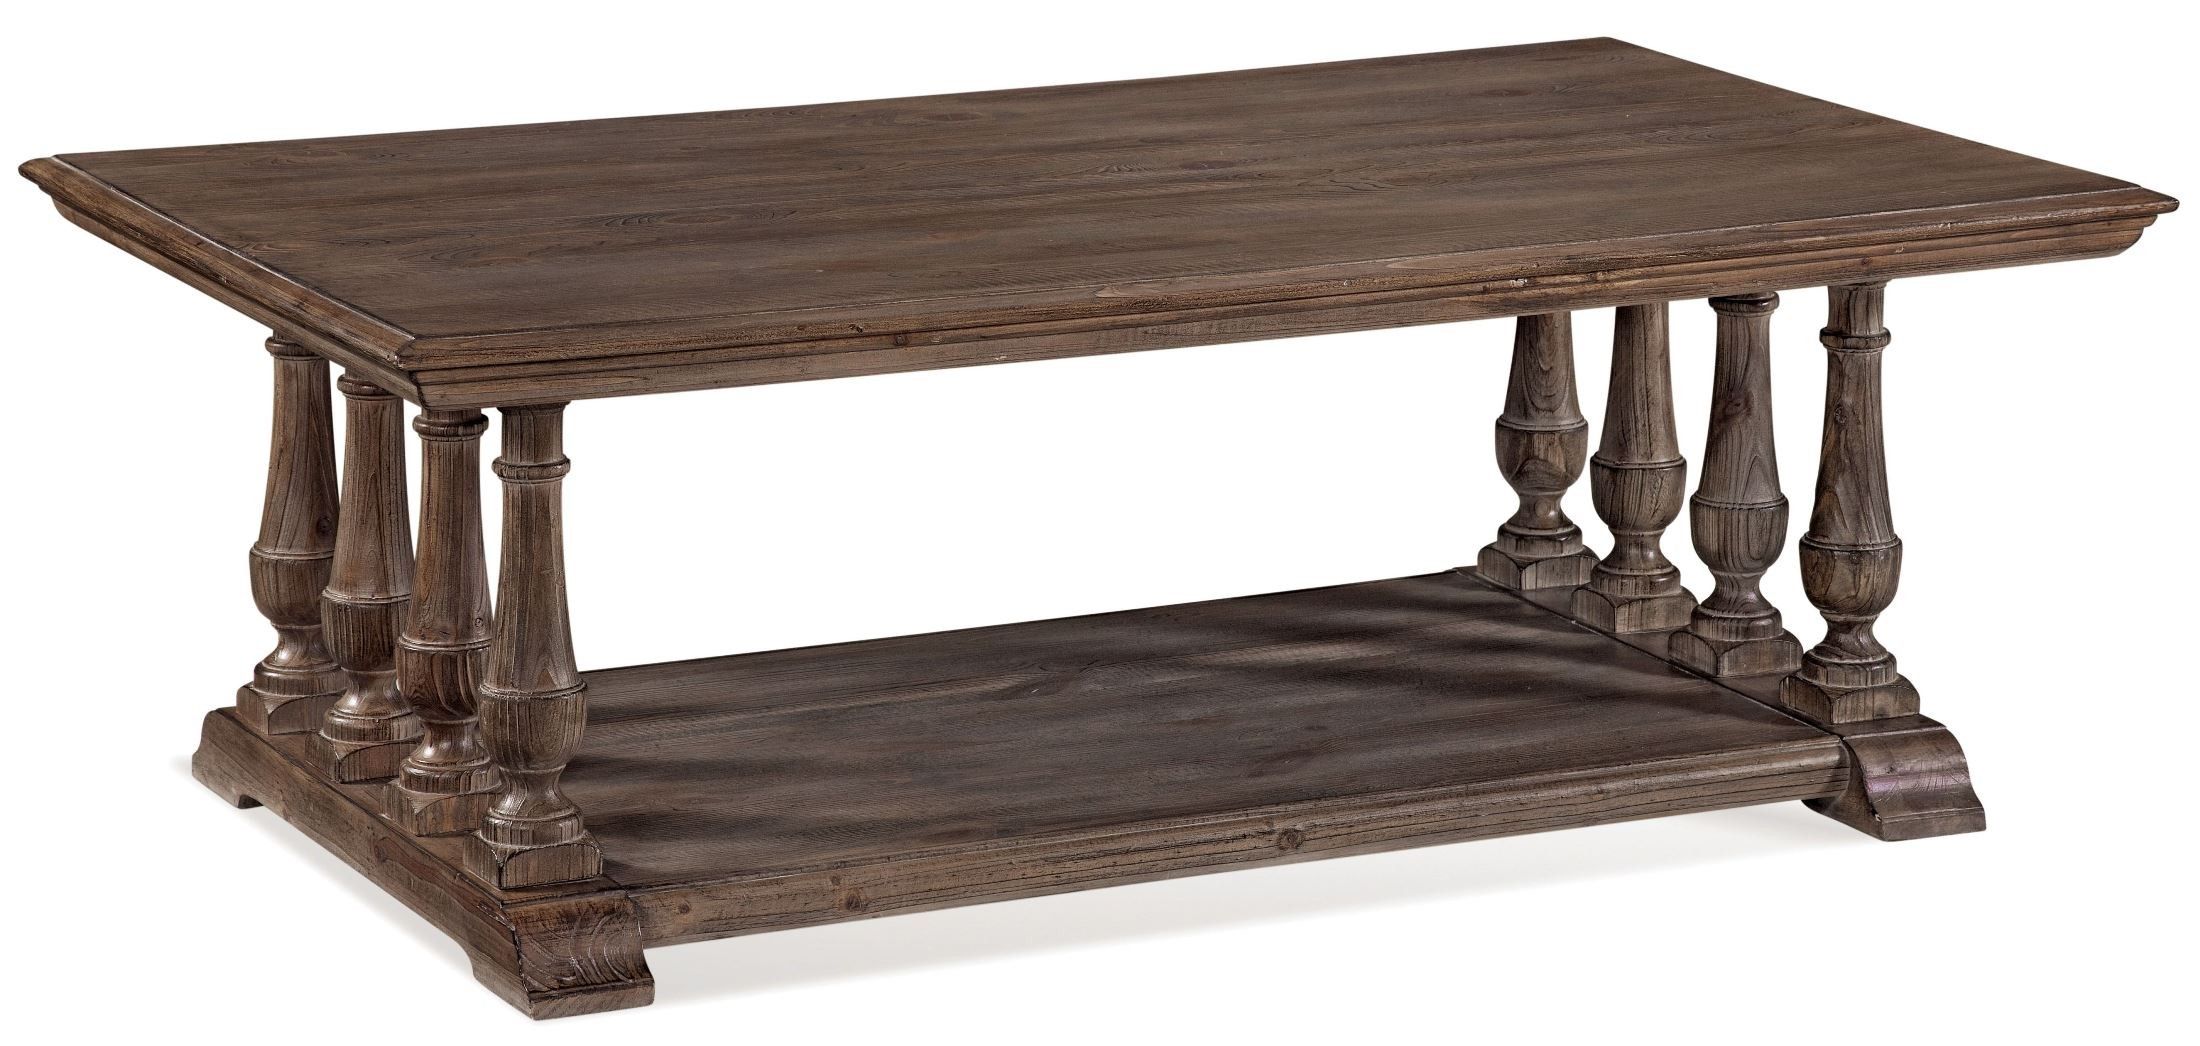 Pemberton Smoke Barnside Rectangular Cocktail Table From Throughout Smoked Barnwood Cocktail Tables (View 14 of 15)